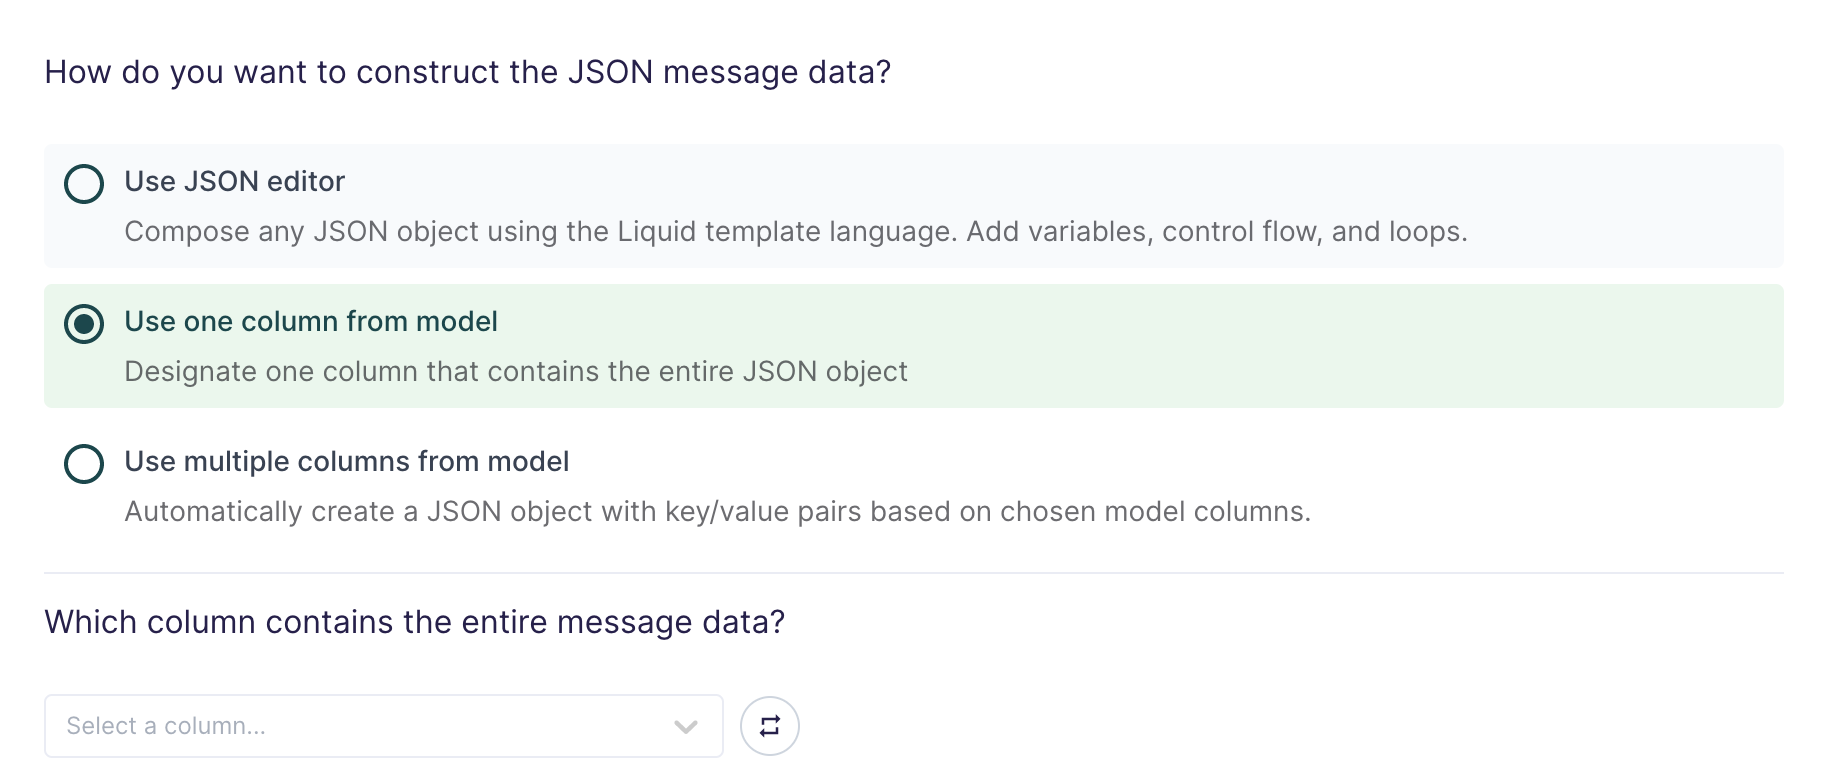 Selecting using one column from the model as the JSON construction method in the Hightouch UI